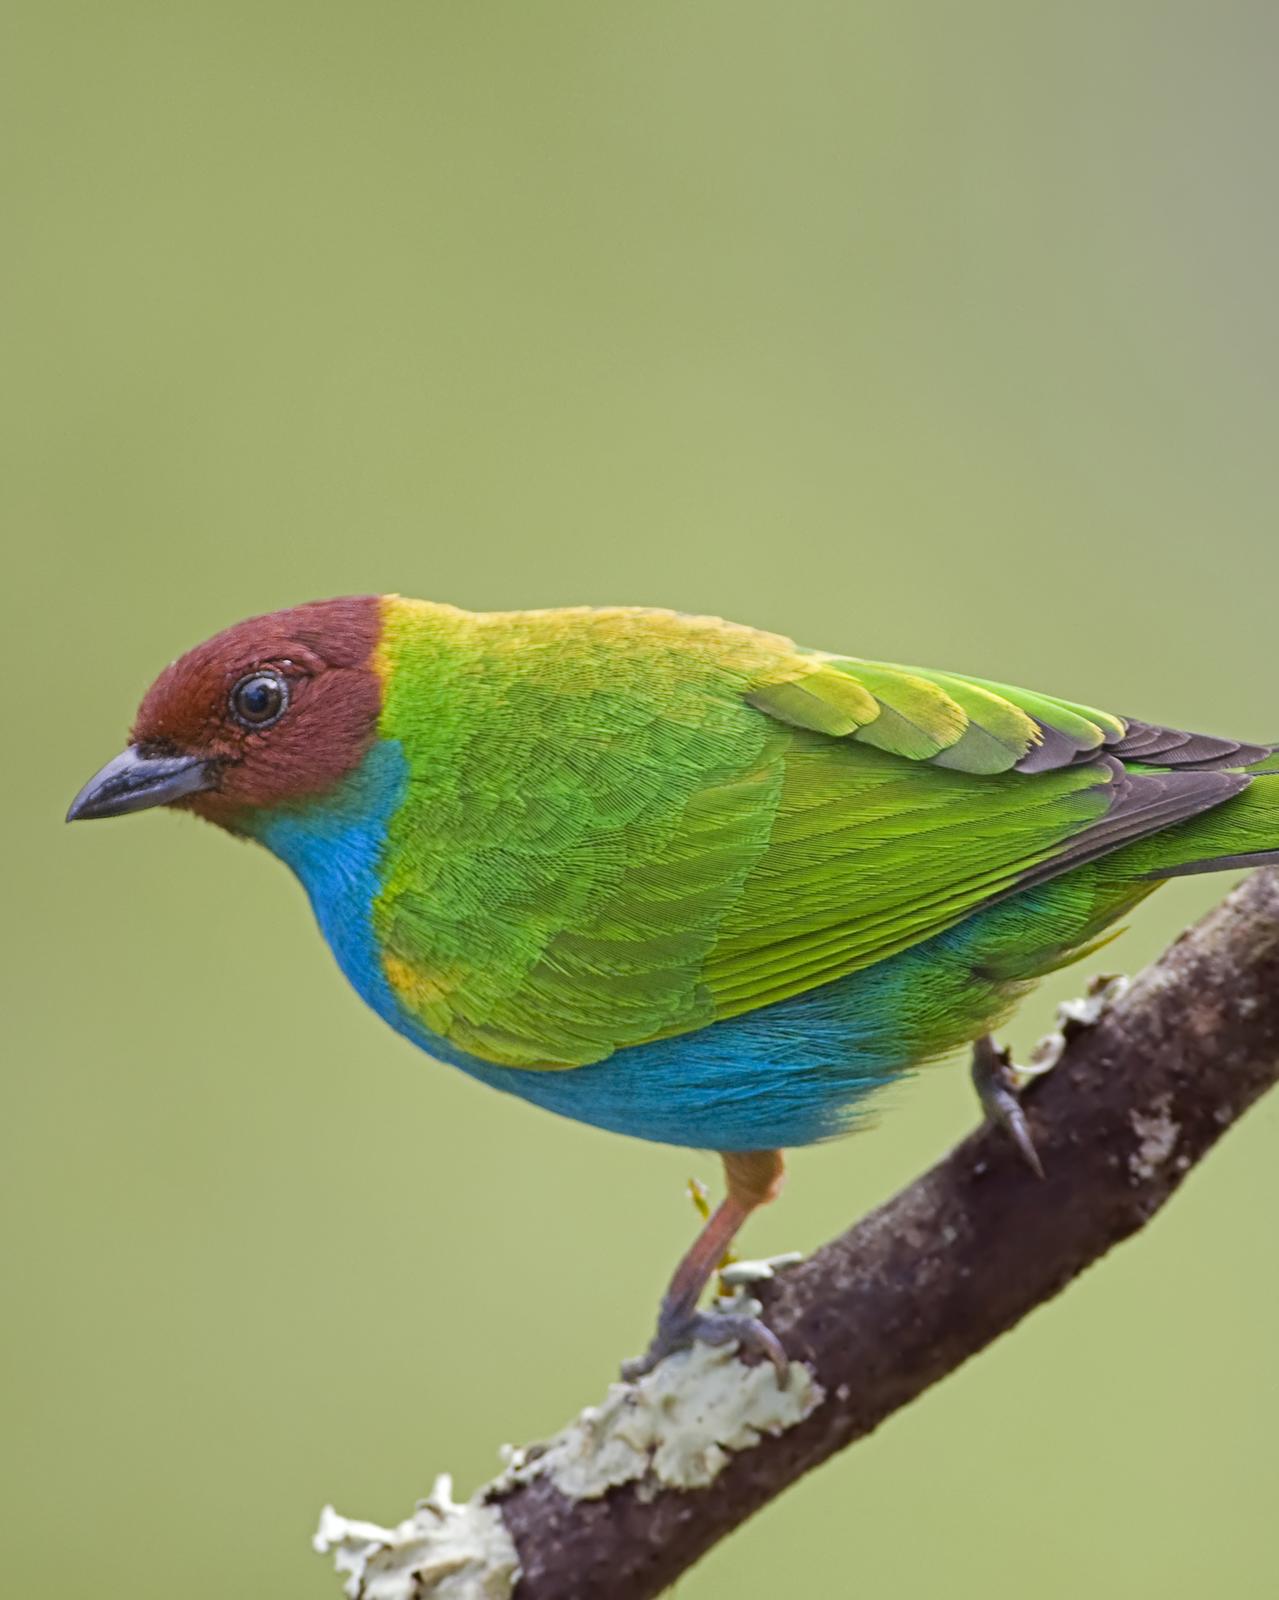 Bay-headed Tanager Photo by Alex Vargas